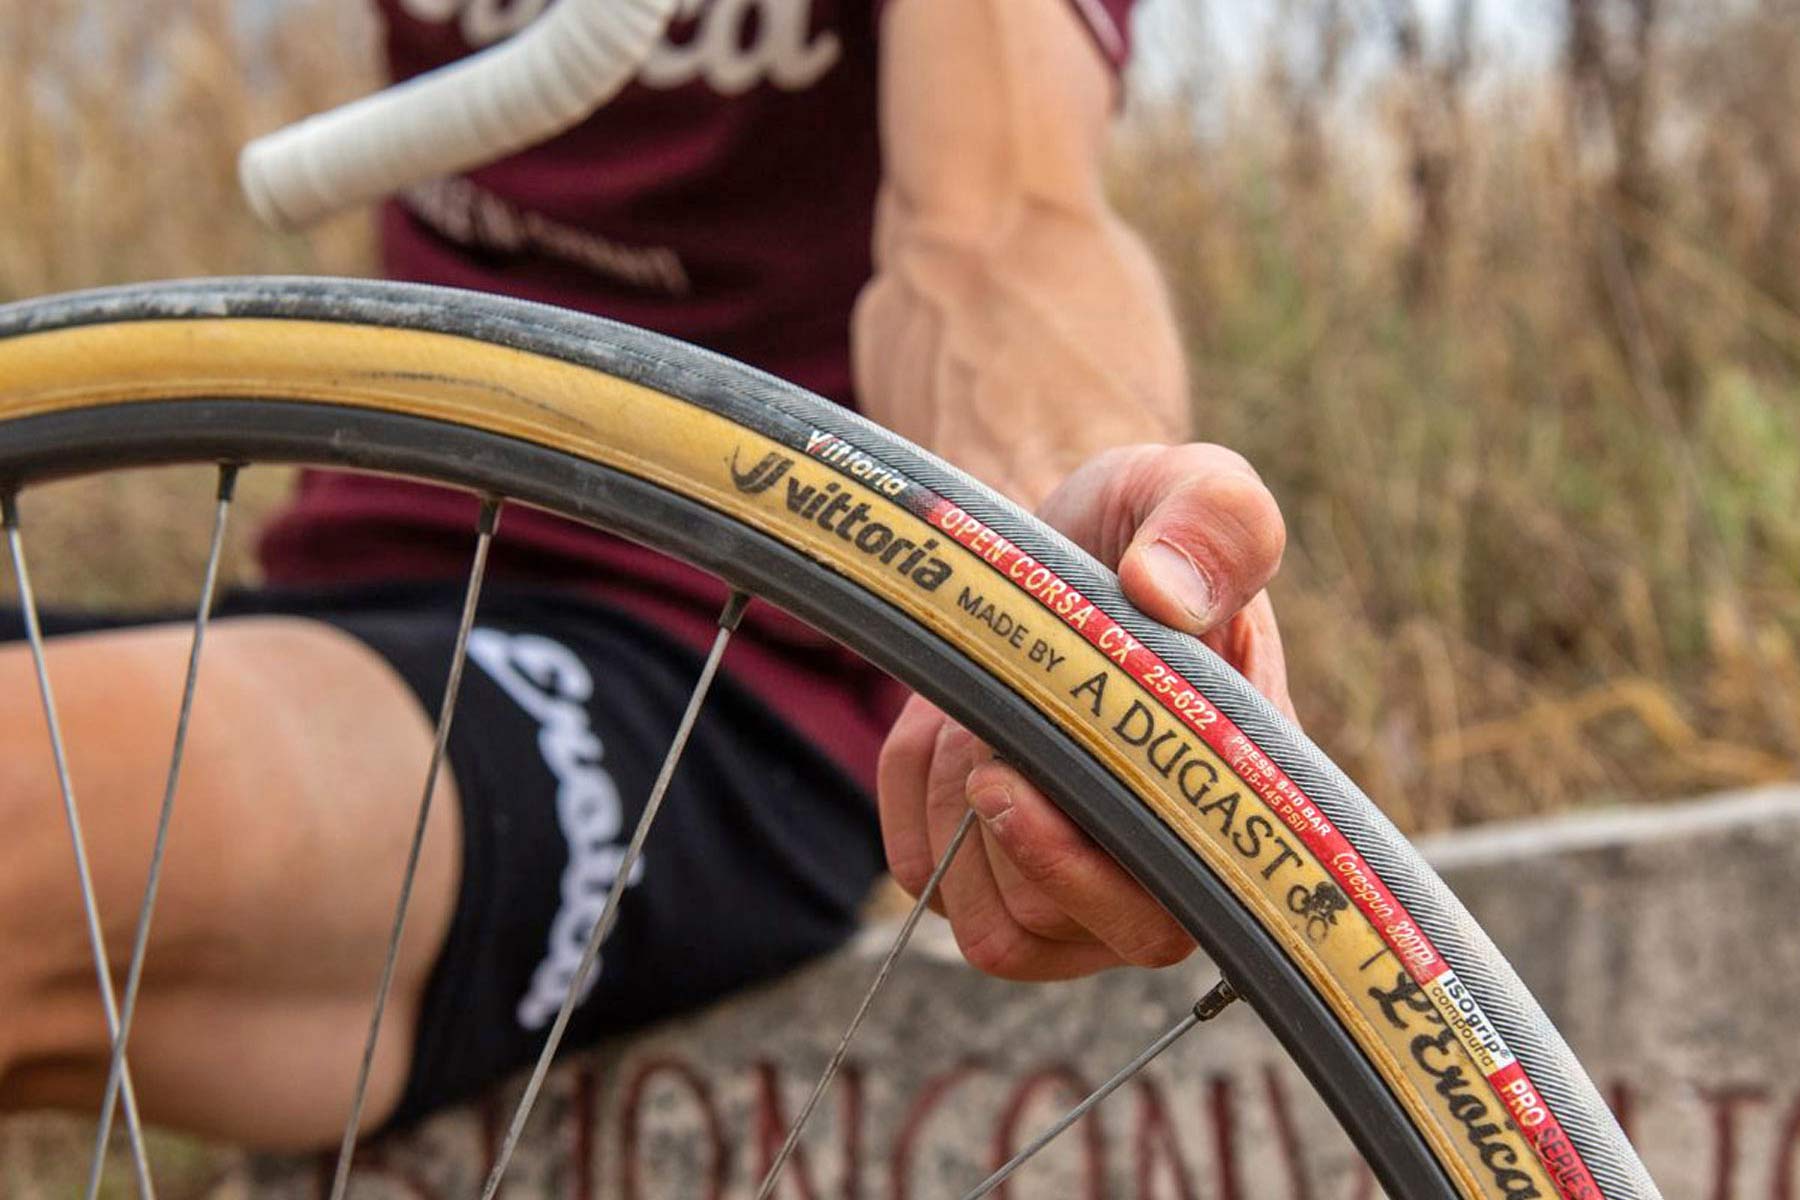 Vittoria made by A Dugast L Eroica limited edition 25mm retro vintage tubular road bike tires